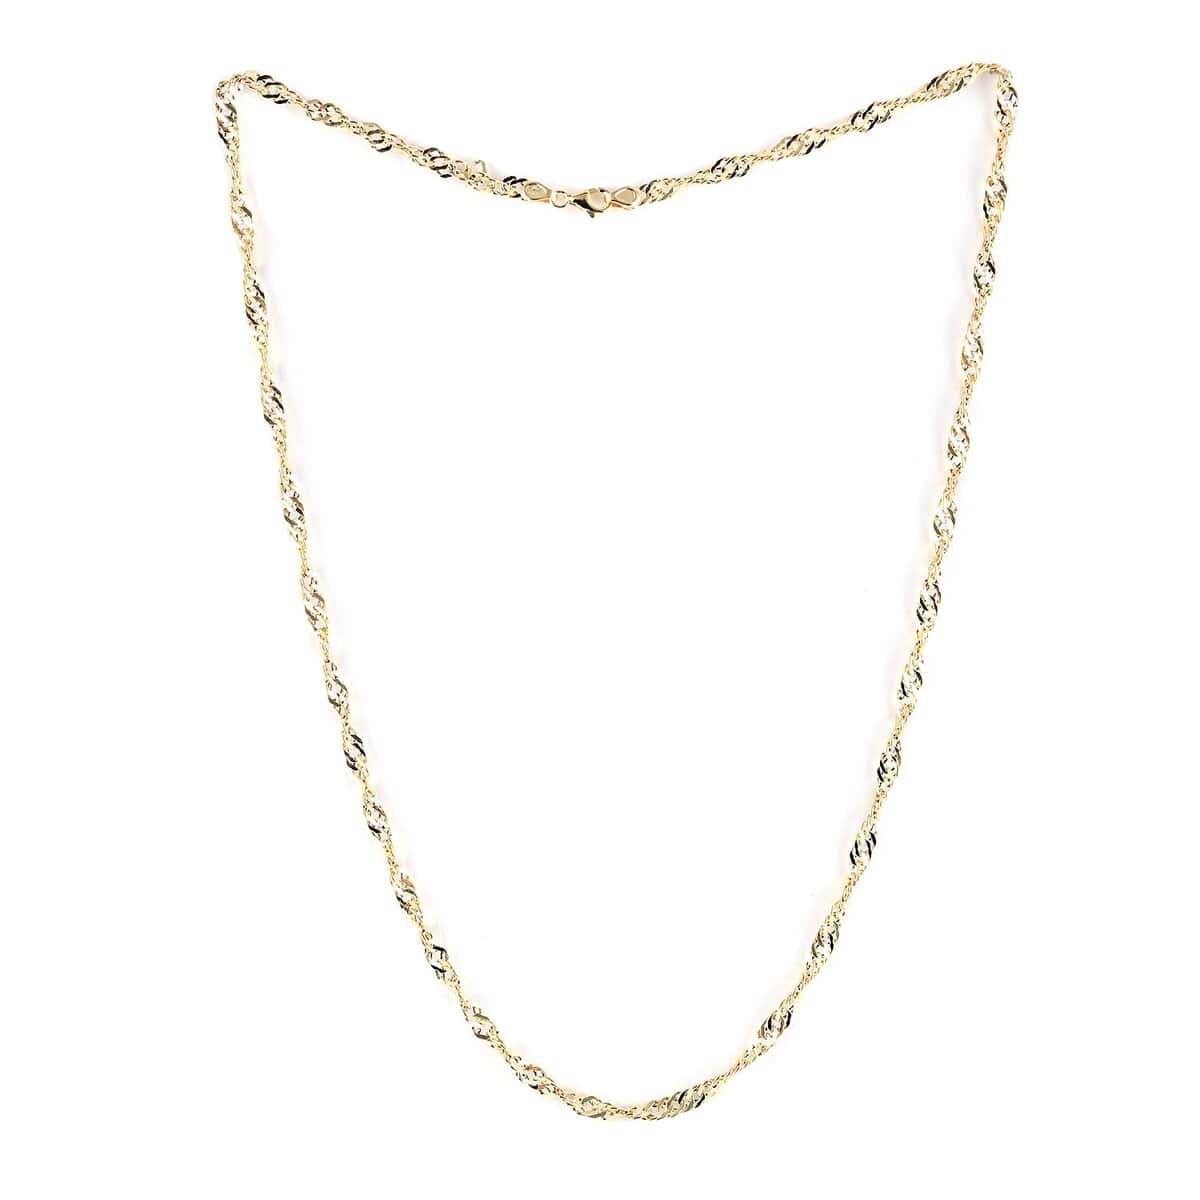 Maestro Gold Collection Italian 14K Yellow Gold 3.5mm Diamond-Cut MarquiseNecklace 20 Inches 2.65 Grams image number 1